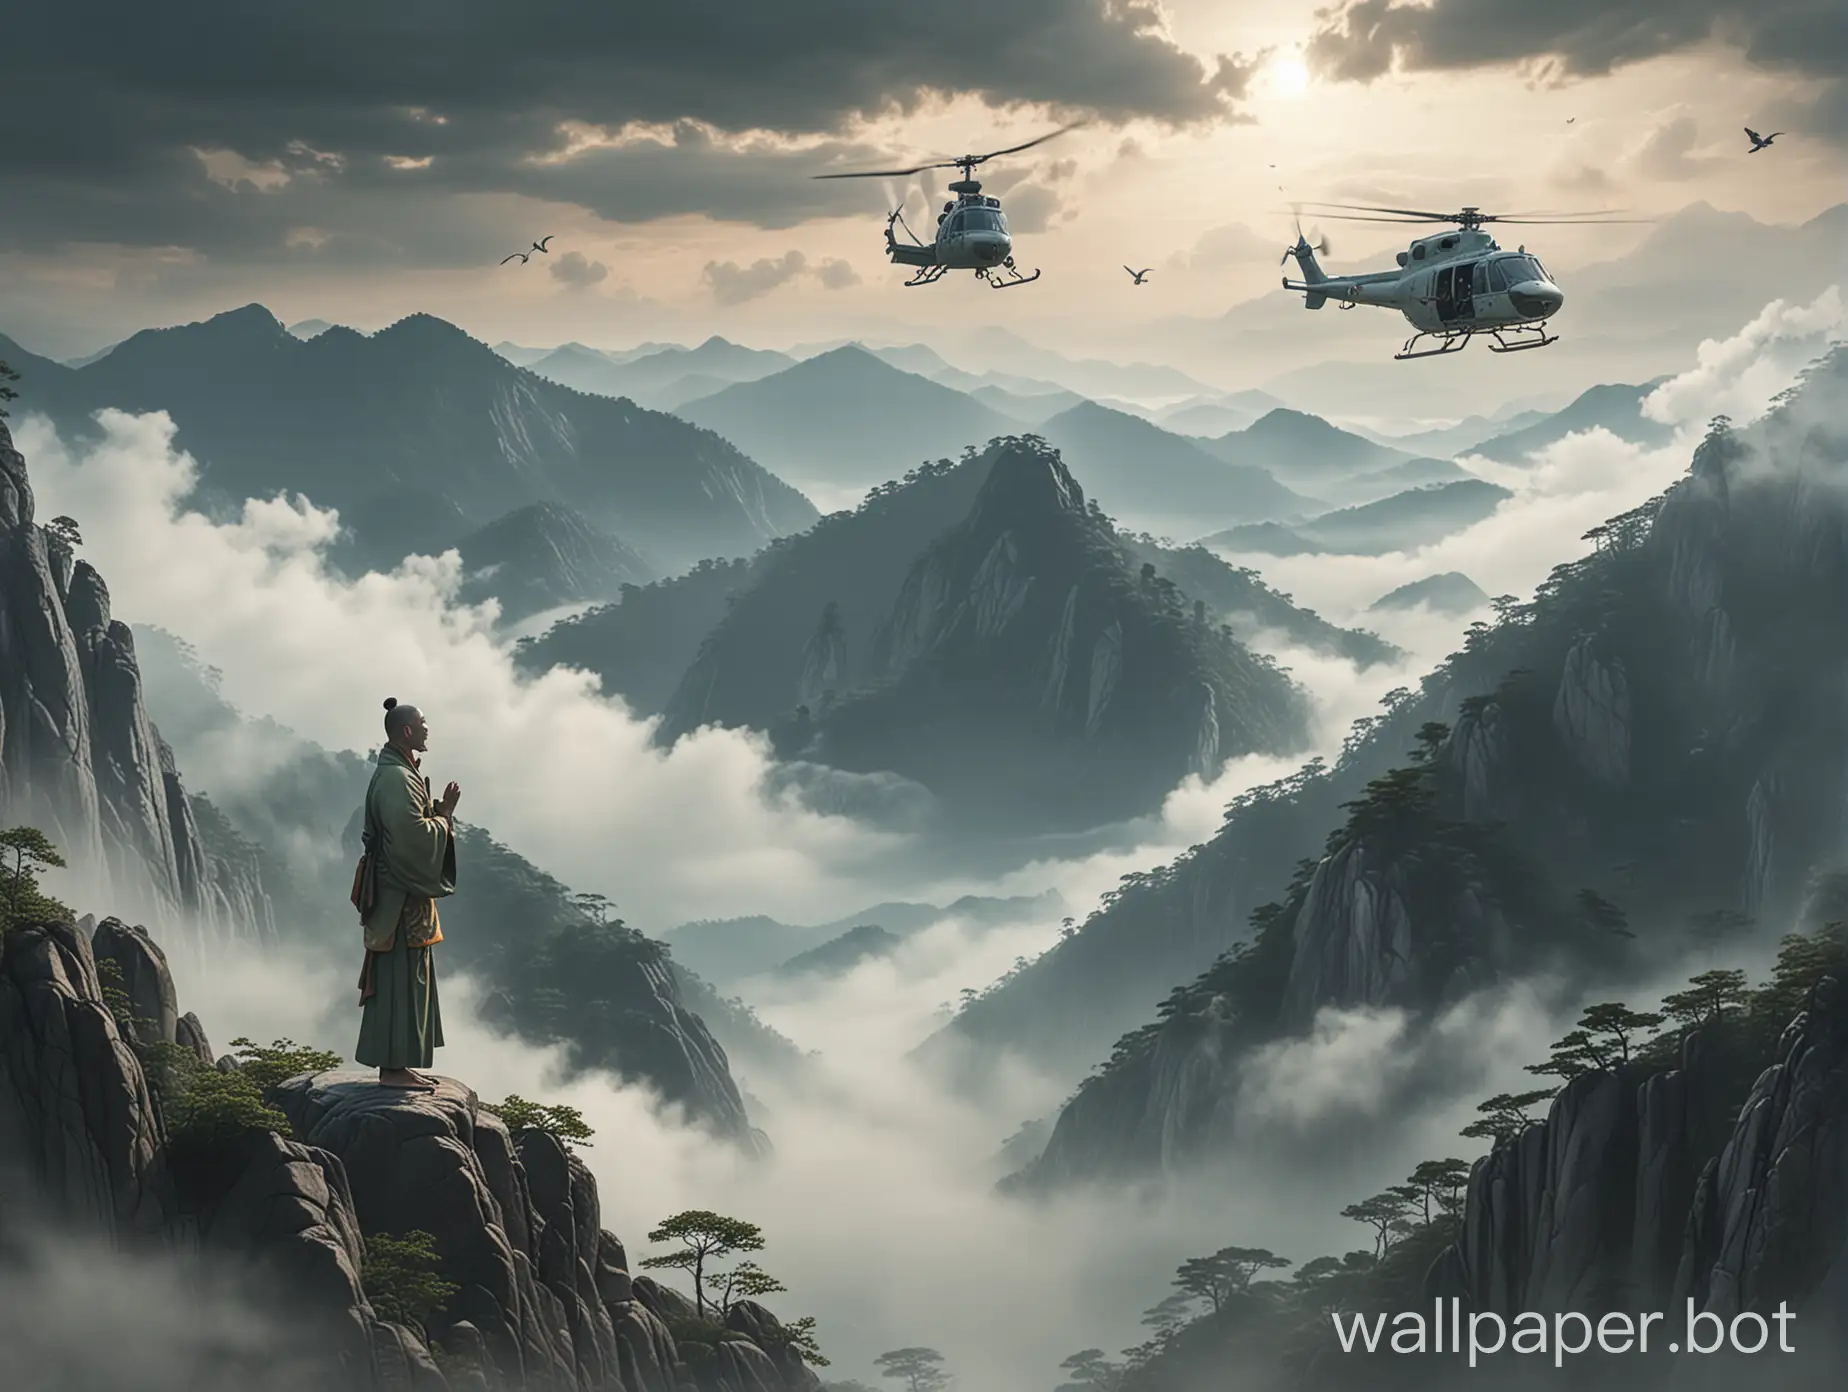 garuda bird flying over misty korean mountains AND zen monk meditating on the mountain AND greenpeace chopper flying in the clouds 4k